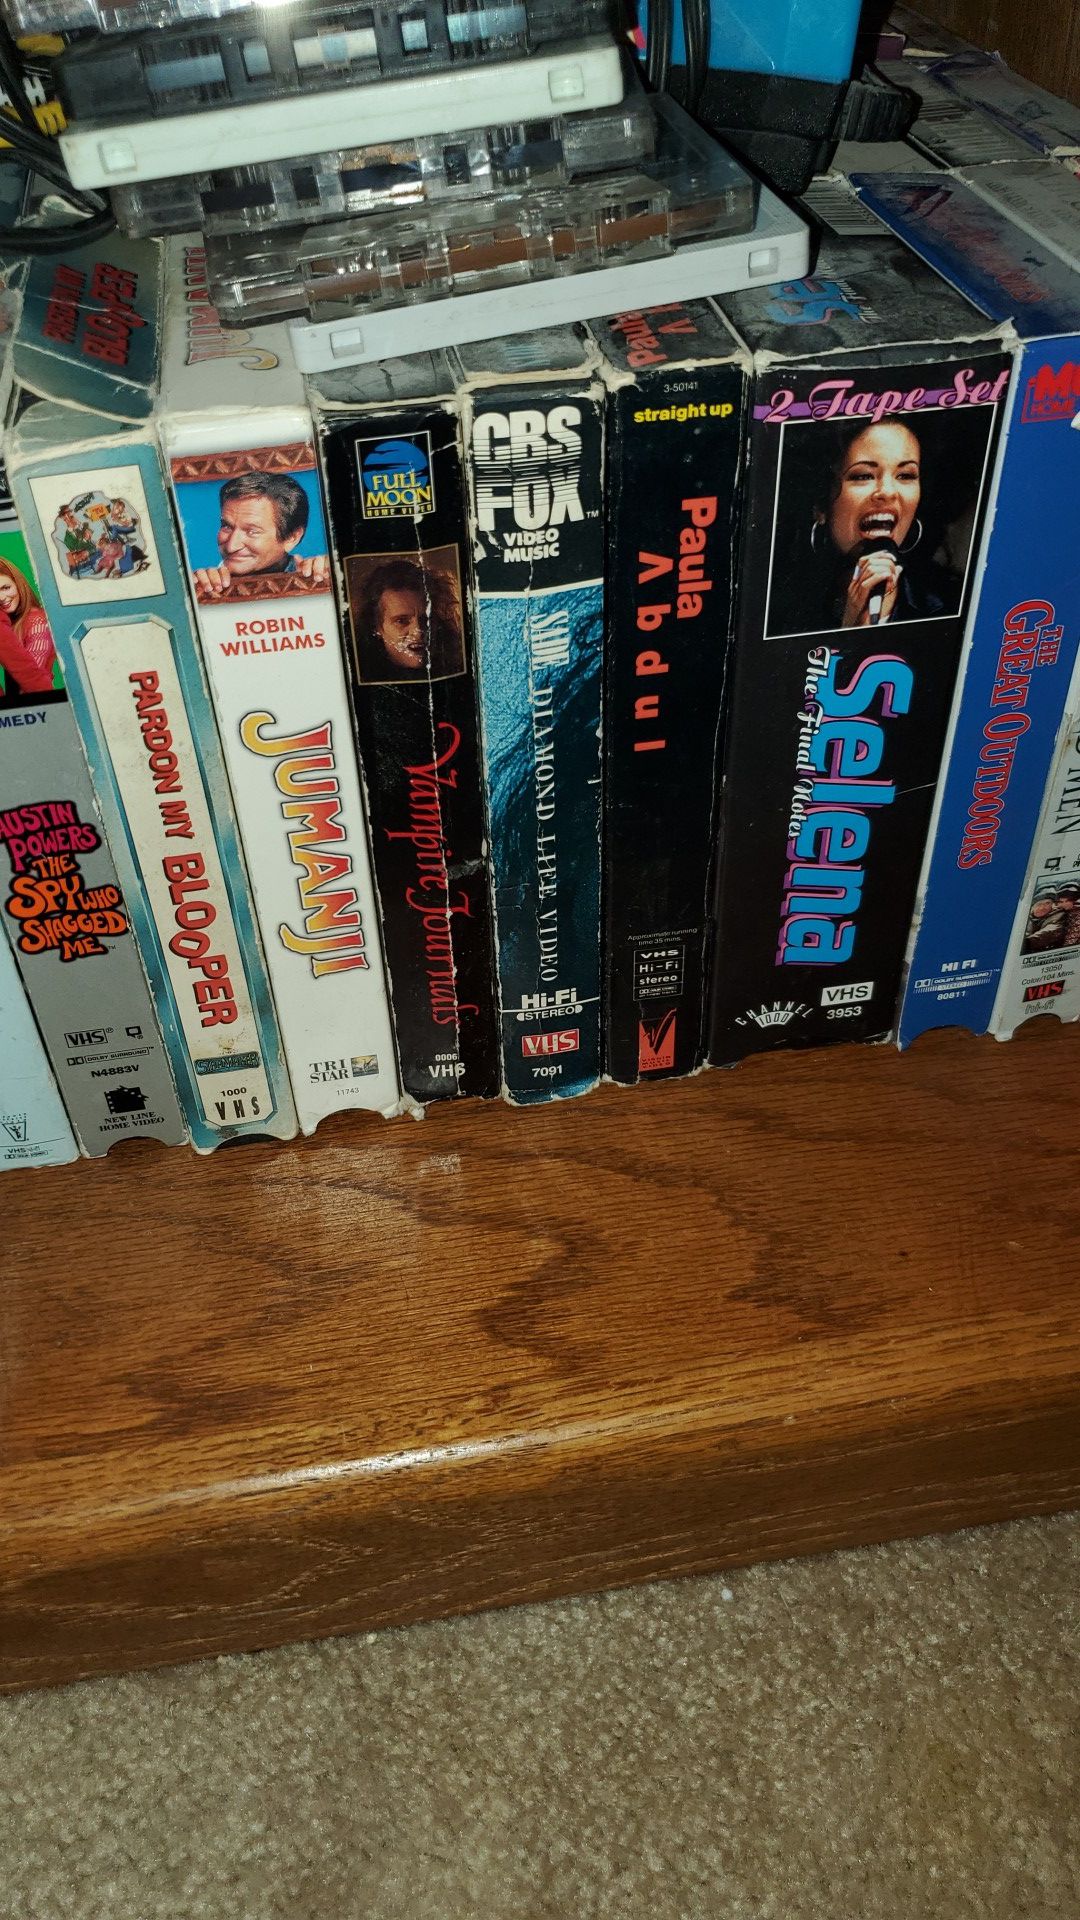 VCR movies